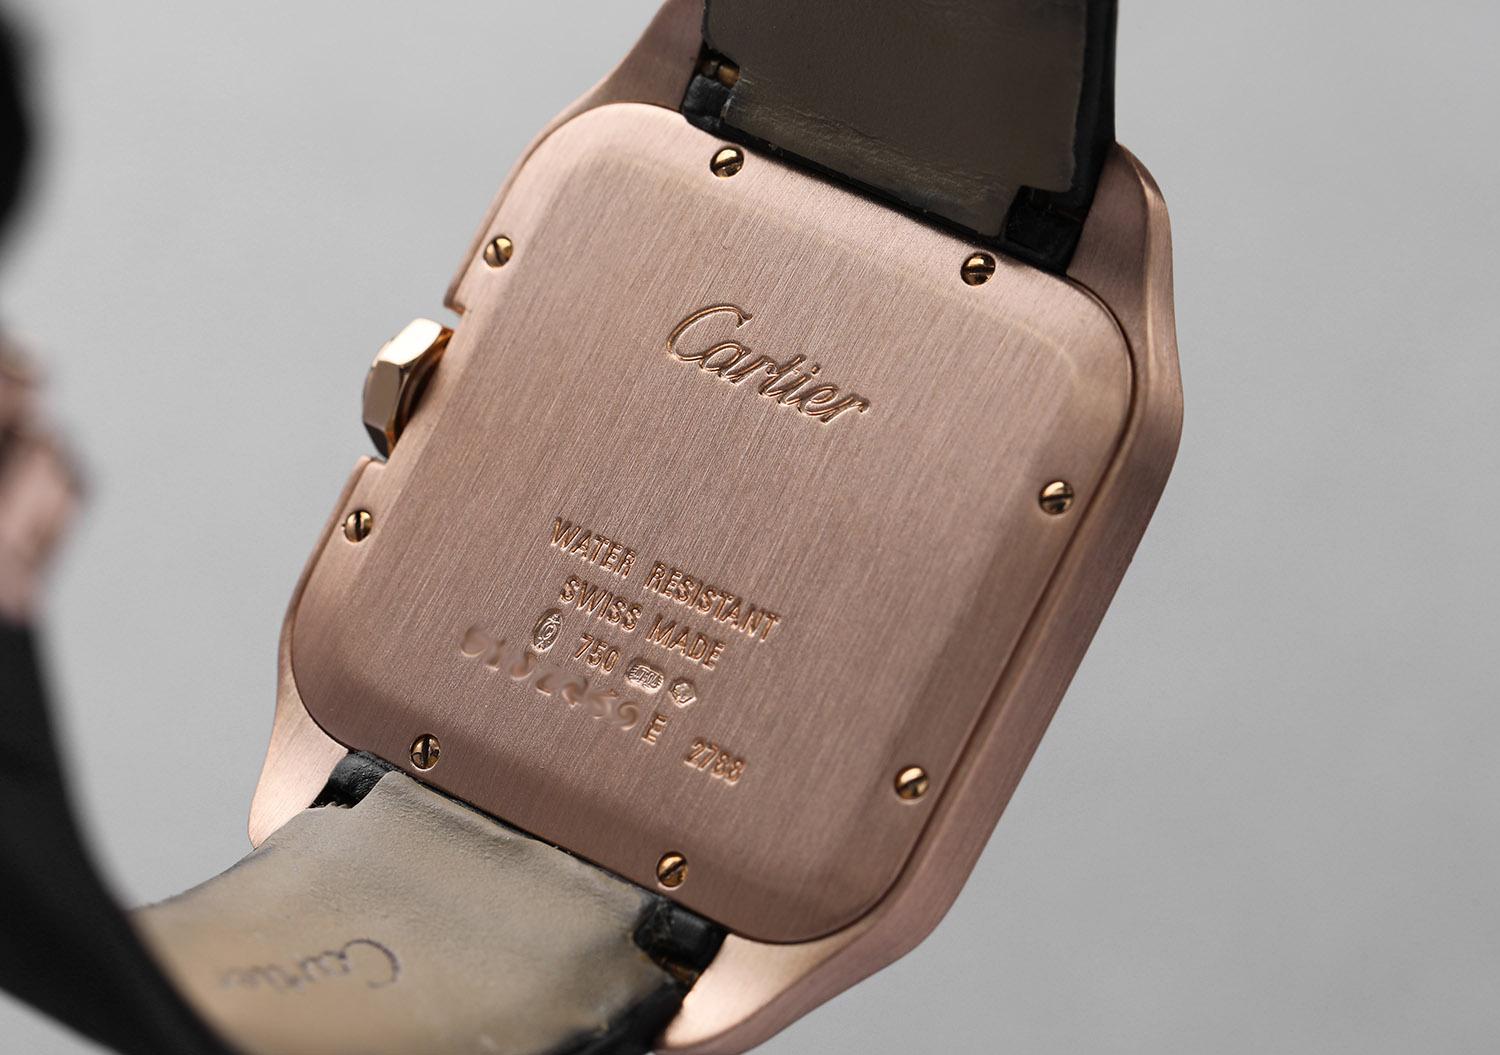 cartier square watch